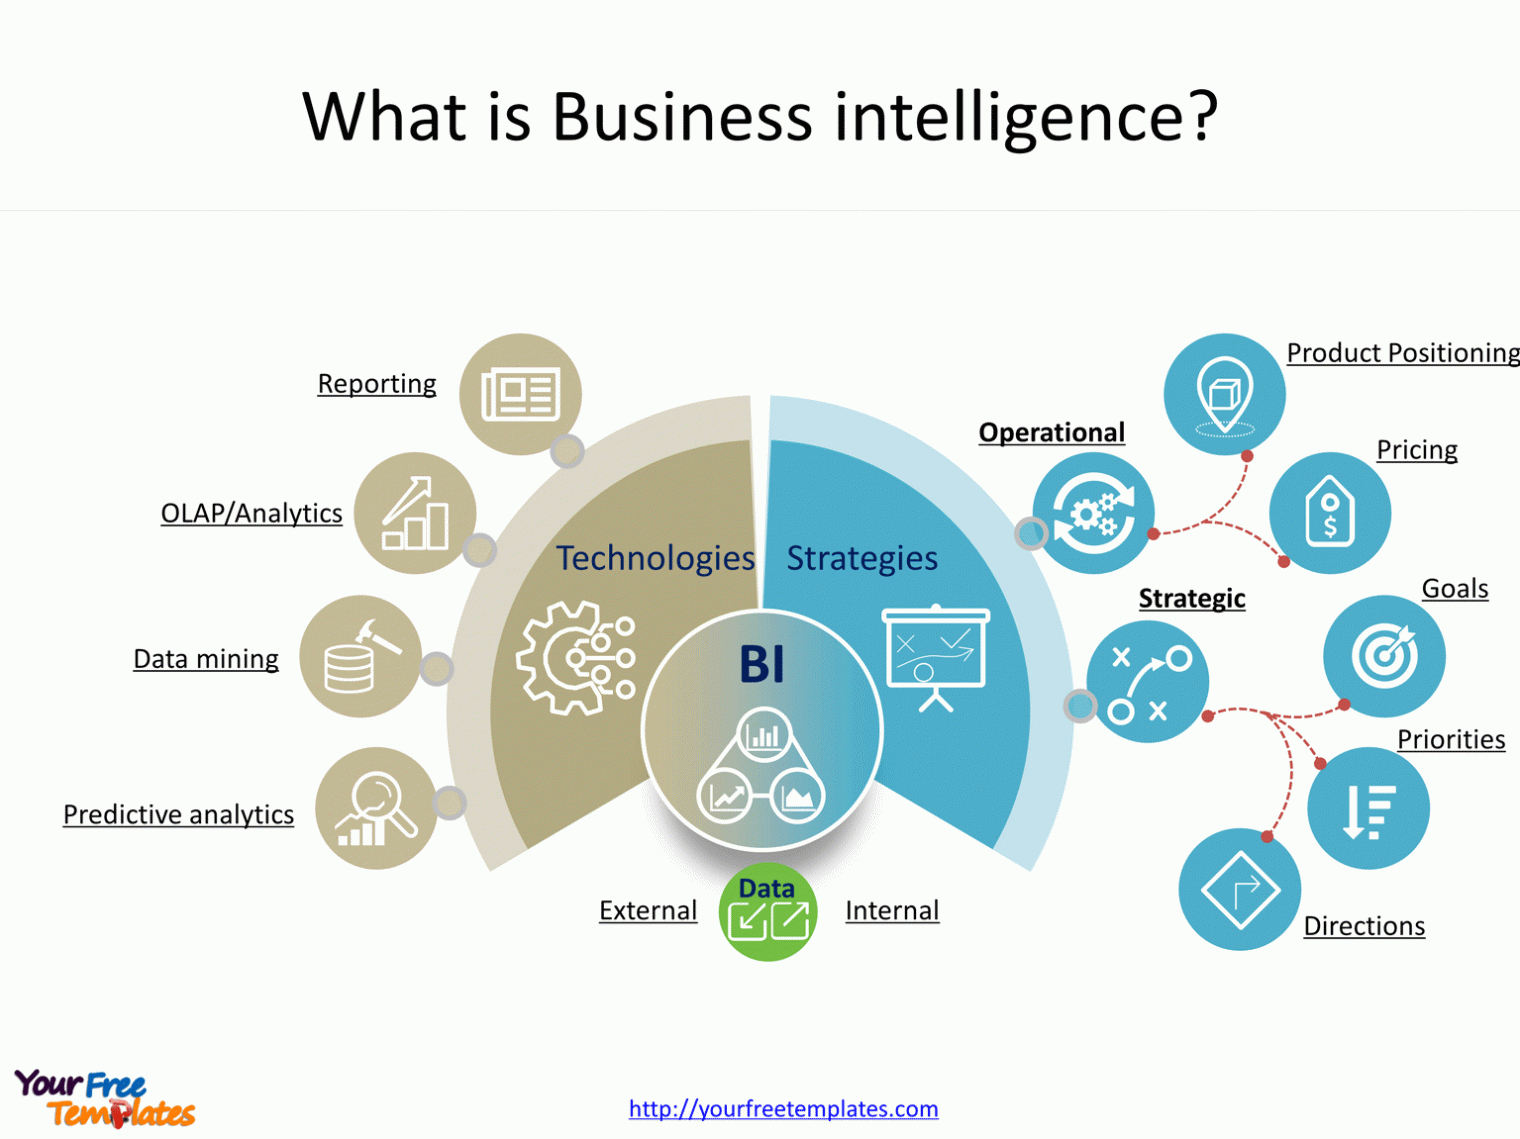 Business Intelligence Infographic - Free Powerpoint Templates pertaining to Business Intelligence Powerpoint Template